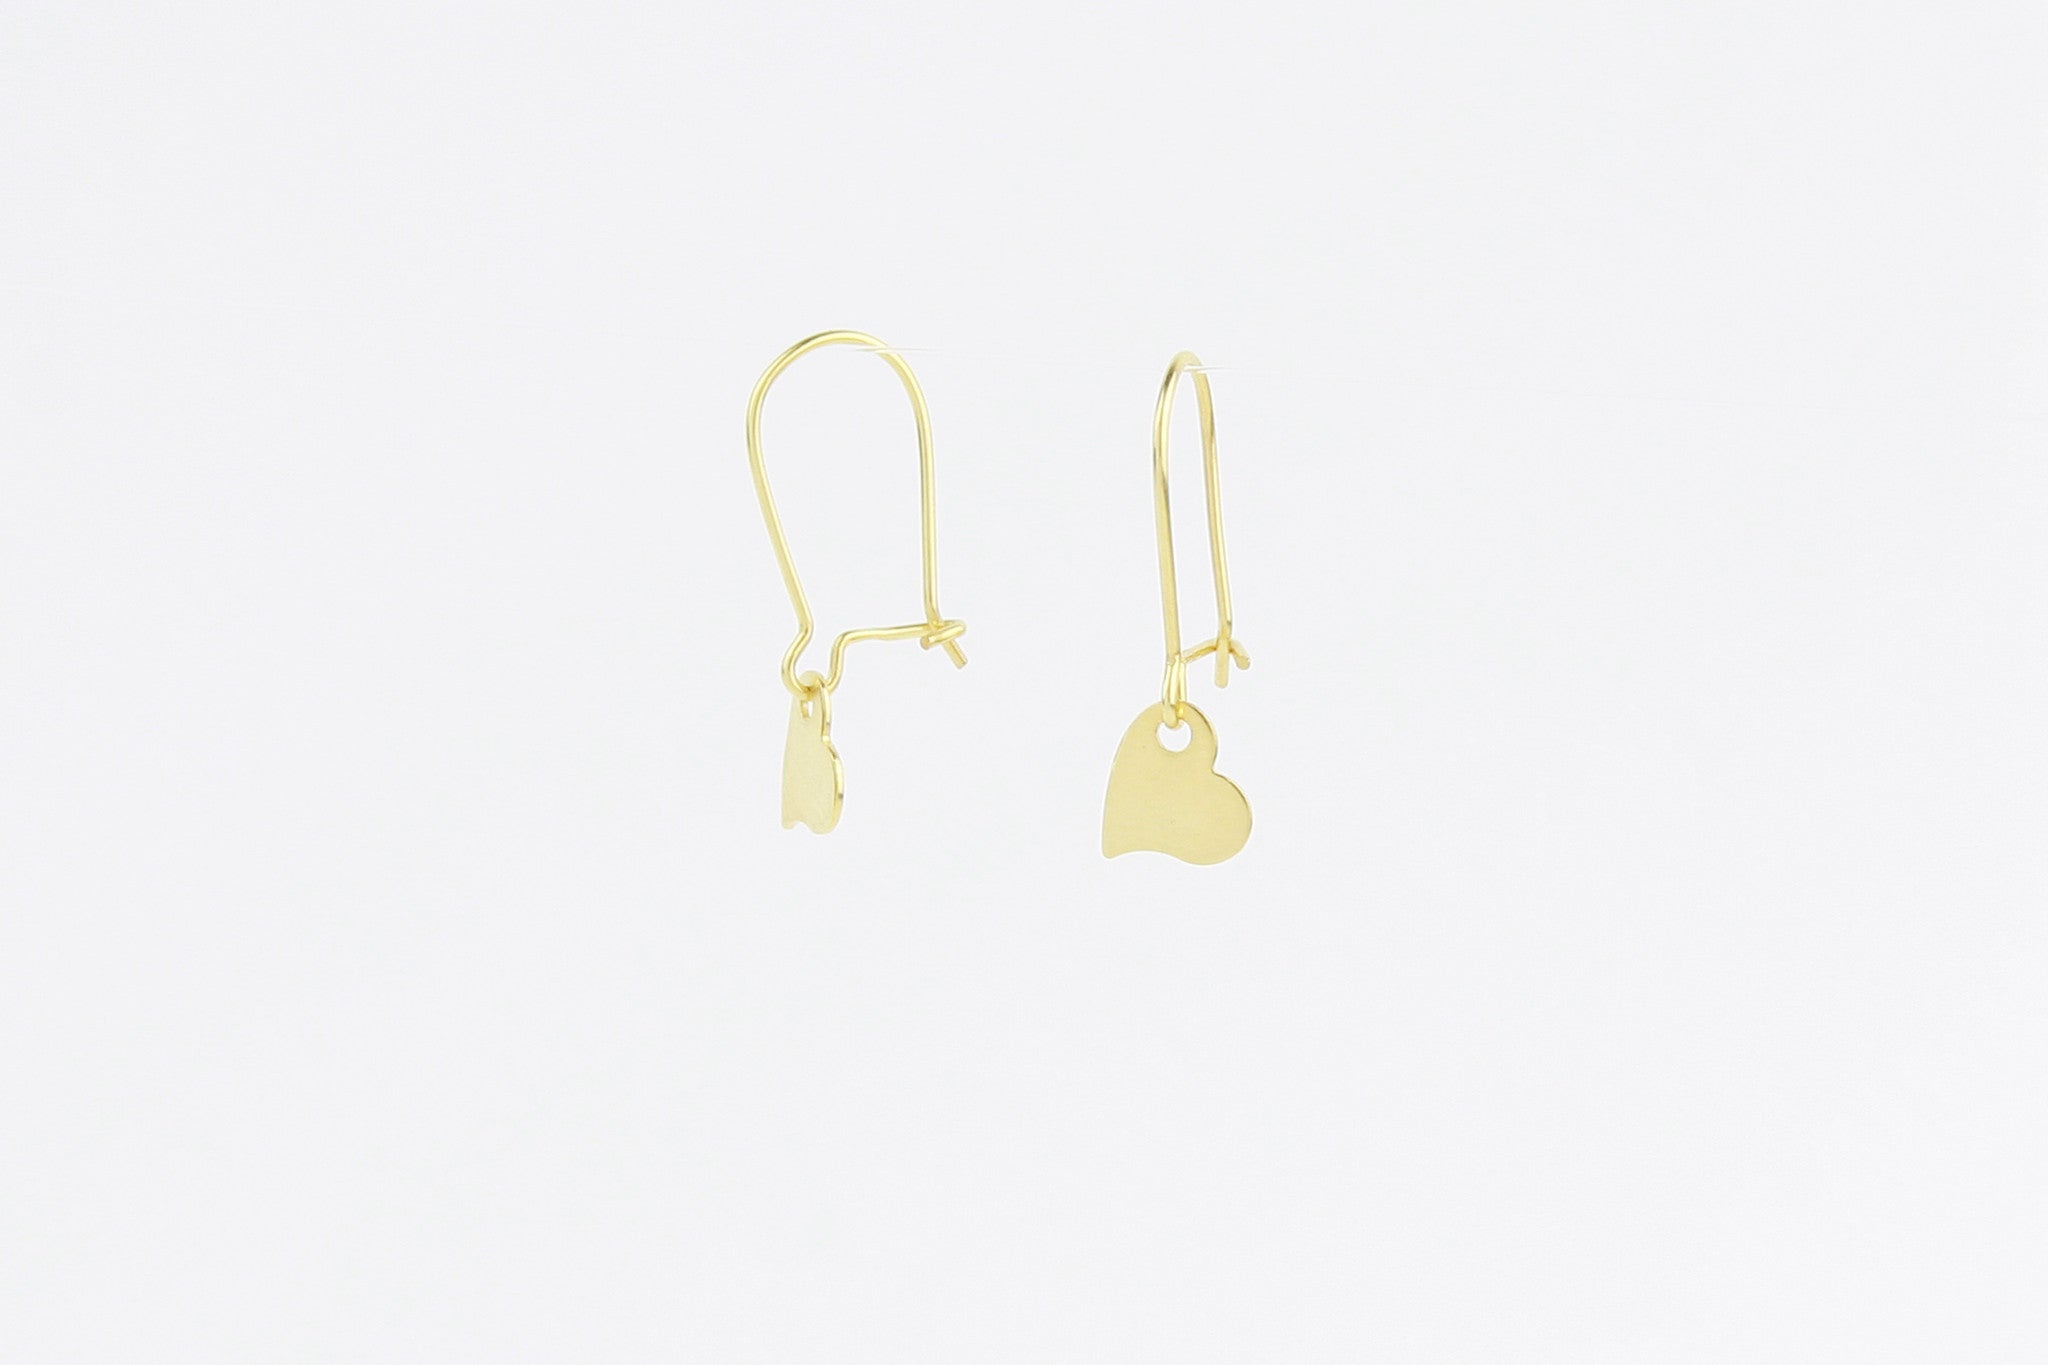 jewelberry ohrringe earrings my love yellow gold plated sterling silver fine jewelry handmade with love fairtrade